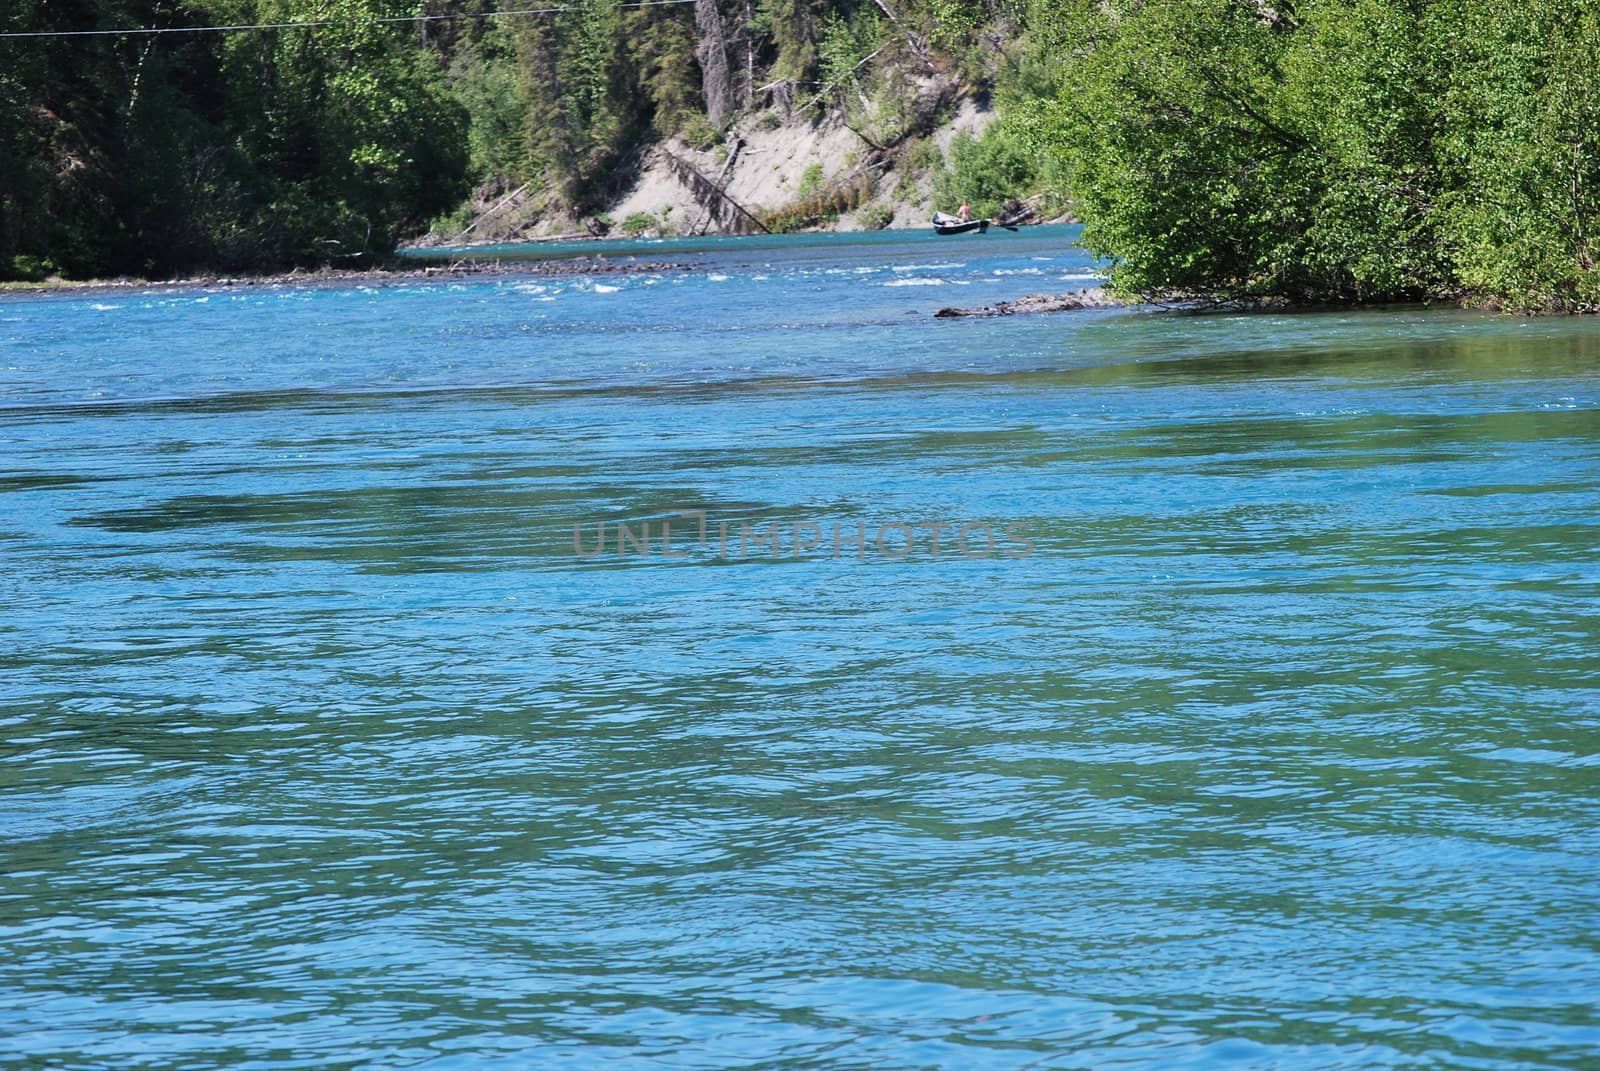 Teal blue waters of the Kenai River in Alaska by WKMarvin